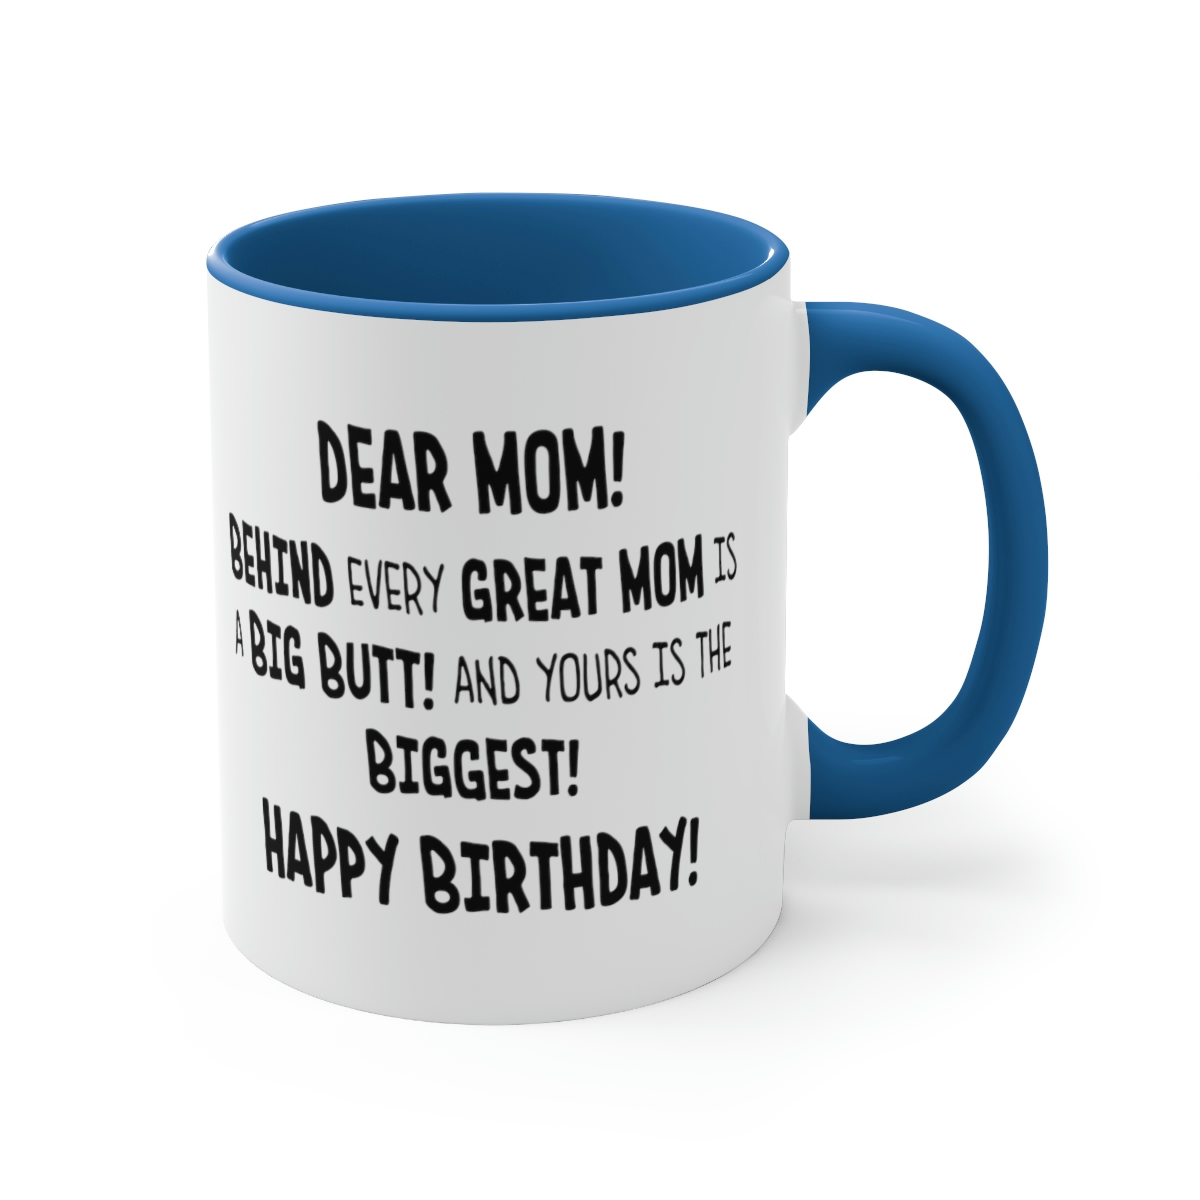 For a #birthday or #mothersday this #mug makes a great and #funny #gift!
For the #mom with #junkinthetrunk 
#thefeyjungle Check out our store on #shopify 
the-fey-jungle.myshopify.com/search?q=butt&…